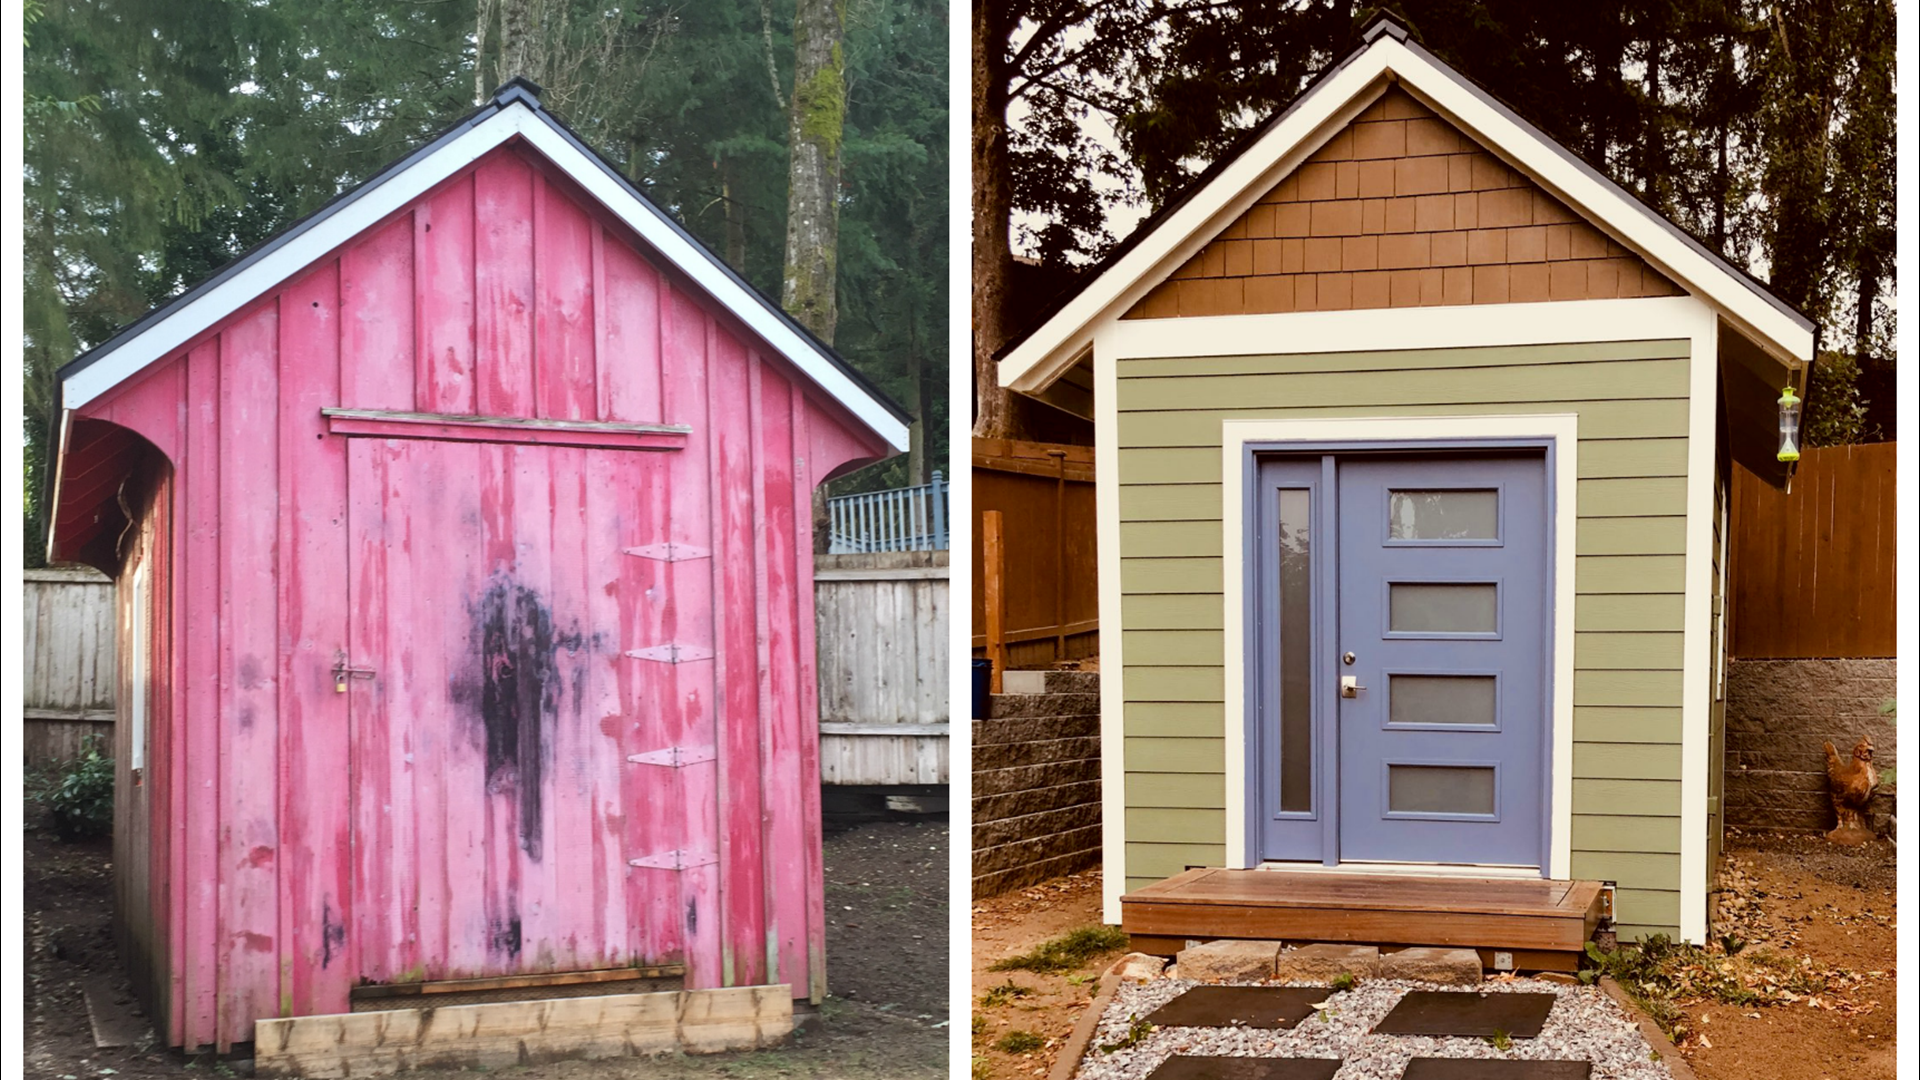 New siding on your home or shed can make a huge impact this spring. Sponsored by Polar Bear Exterior Solutions.